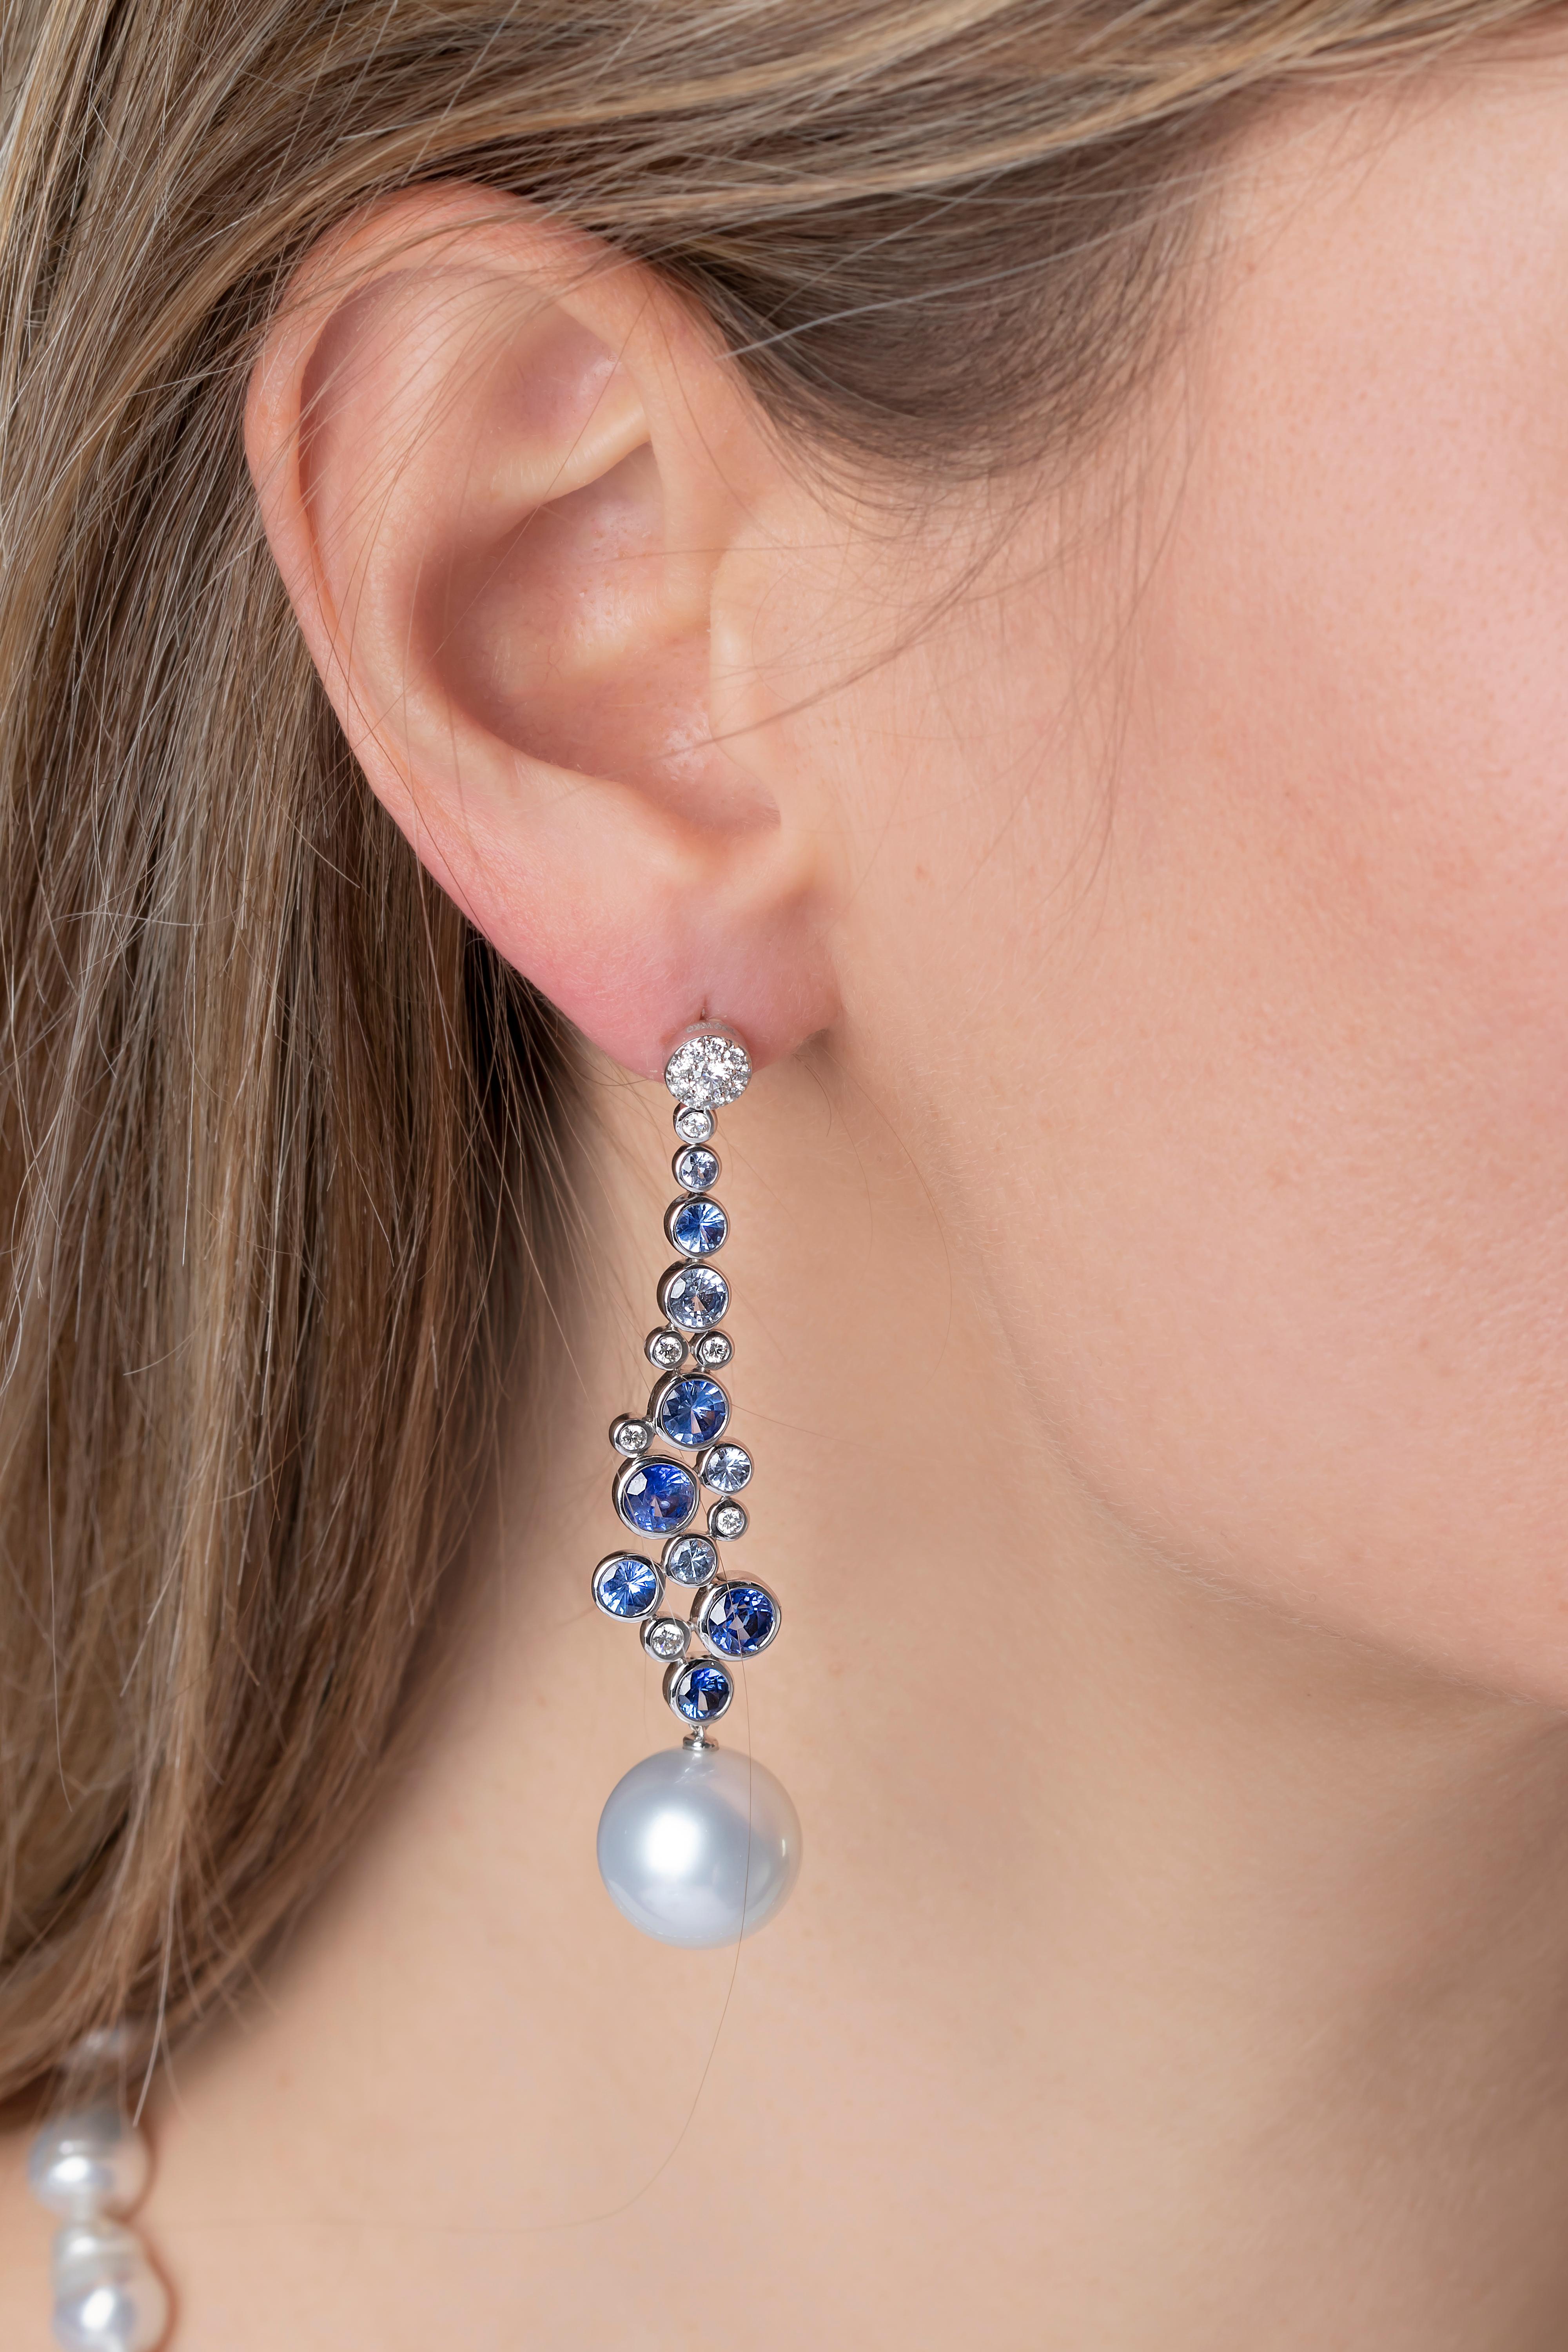 These striking earrings by Yoko London feature lustrous South Sea pearls beneath a scattering of sapphires and diamonds. These earrings have been masterfully engineered in our London atelier to move with their wearer, meaning they exude a constant